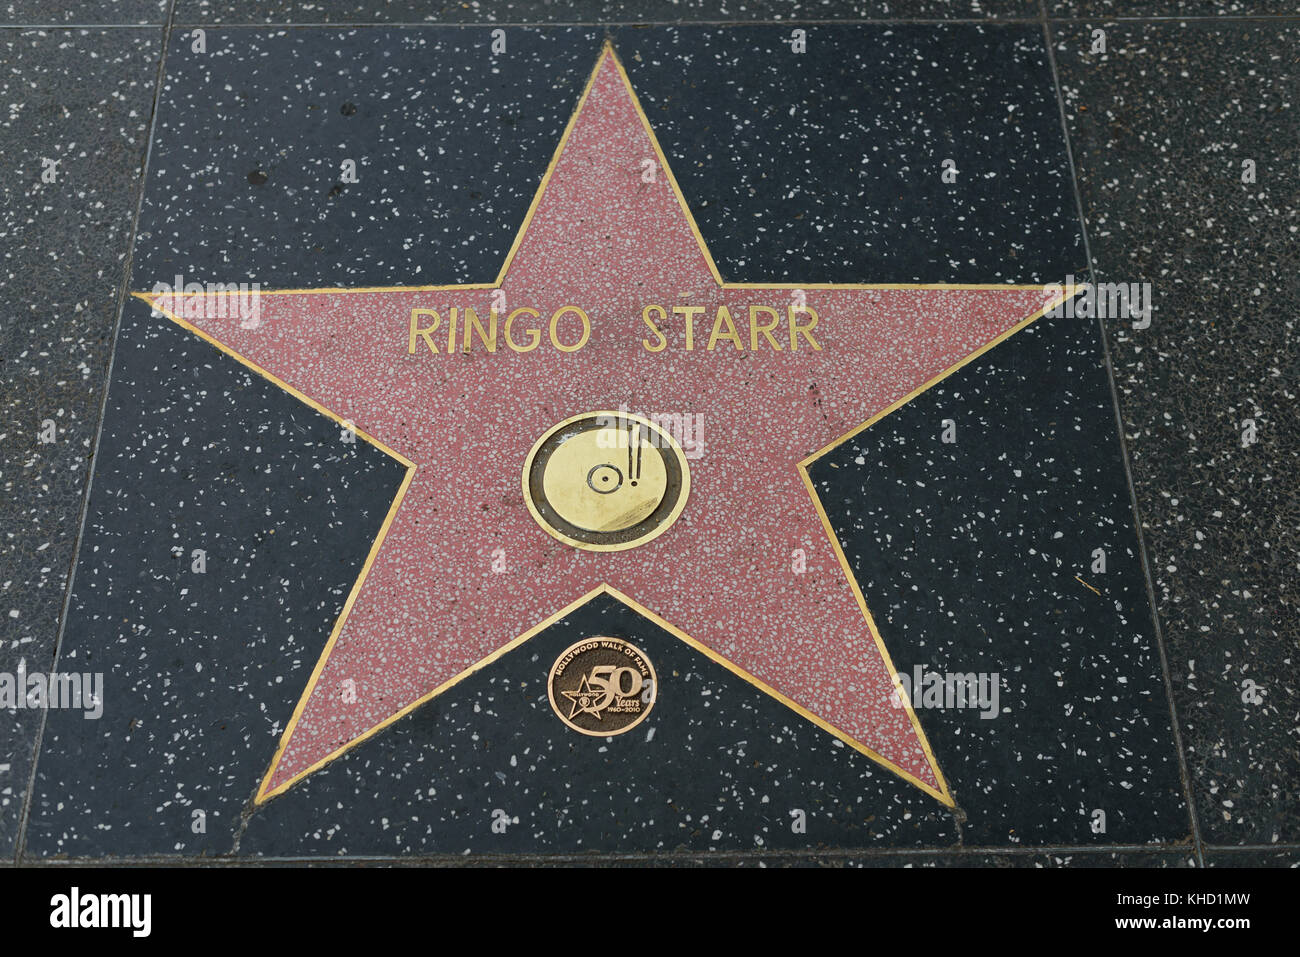 HOLLYWOOD, CA - DICEMBRE 06: Ringo Starr star on the Hollywood Walk of Fame a Hollywood, California il 6 dicembre 2016. Foto Stock